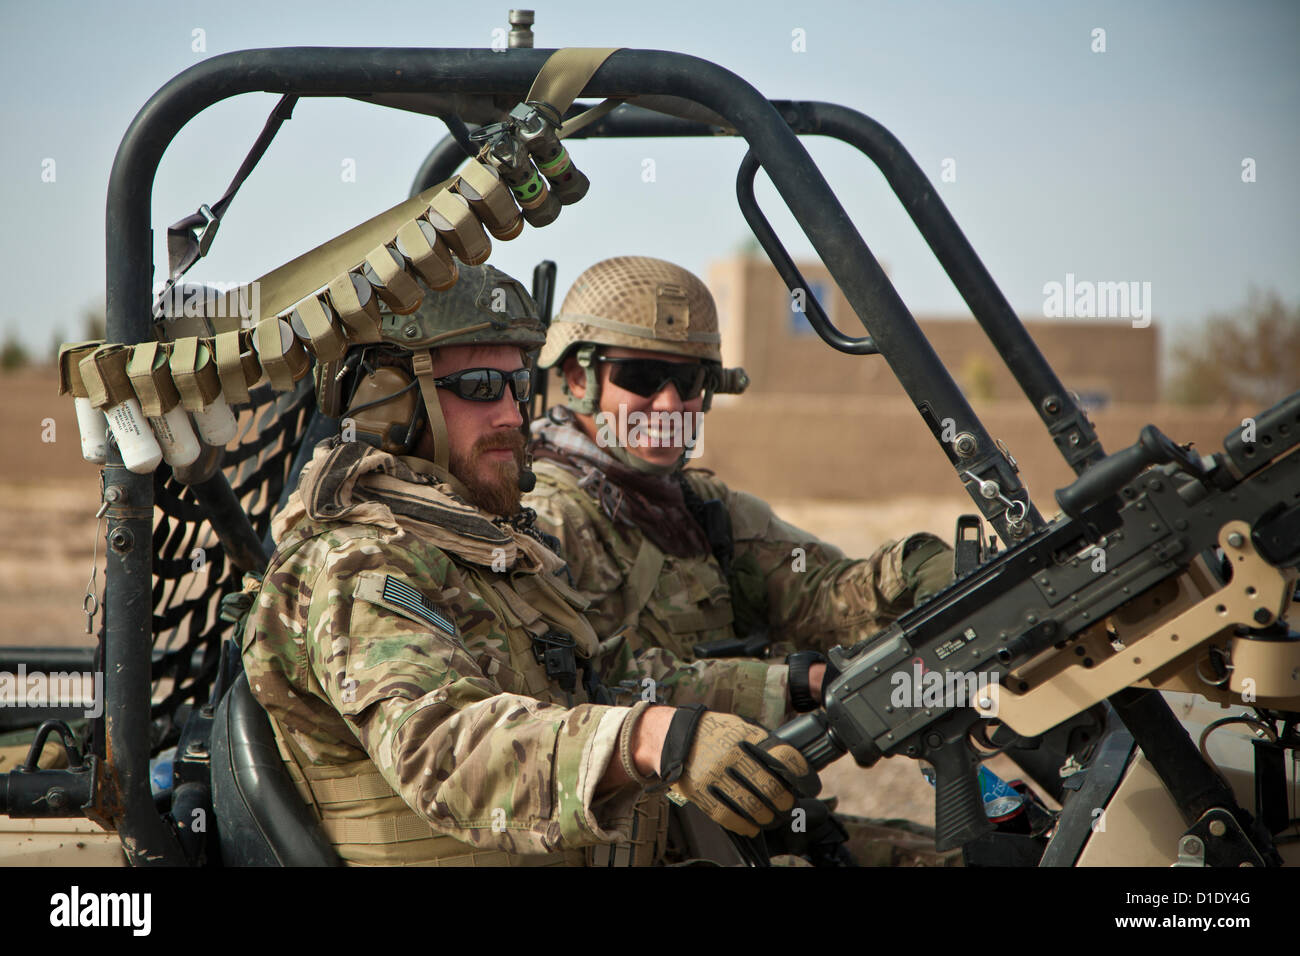 US Special Forces ride in a light-tactical all-terrain vehicle during a patrol December 16, 2012 in Farah province, Afghanistan. Stock Photo